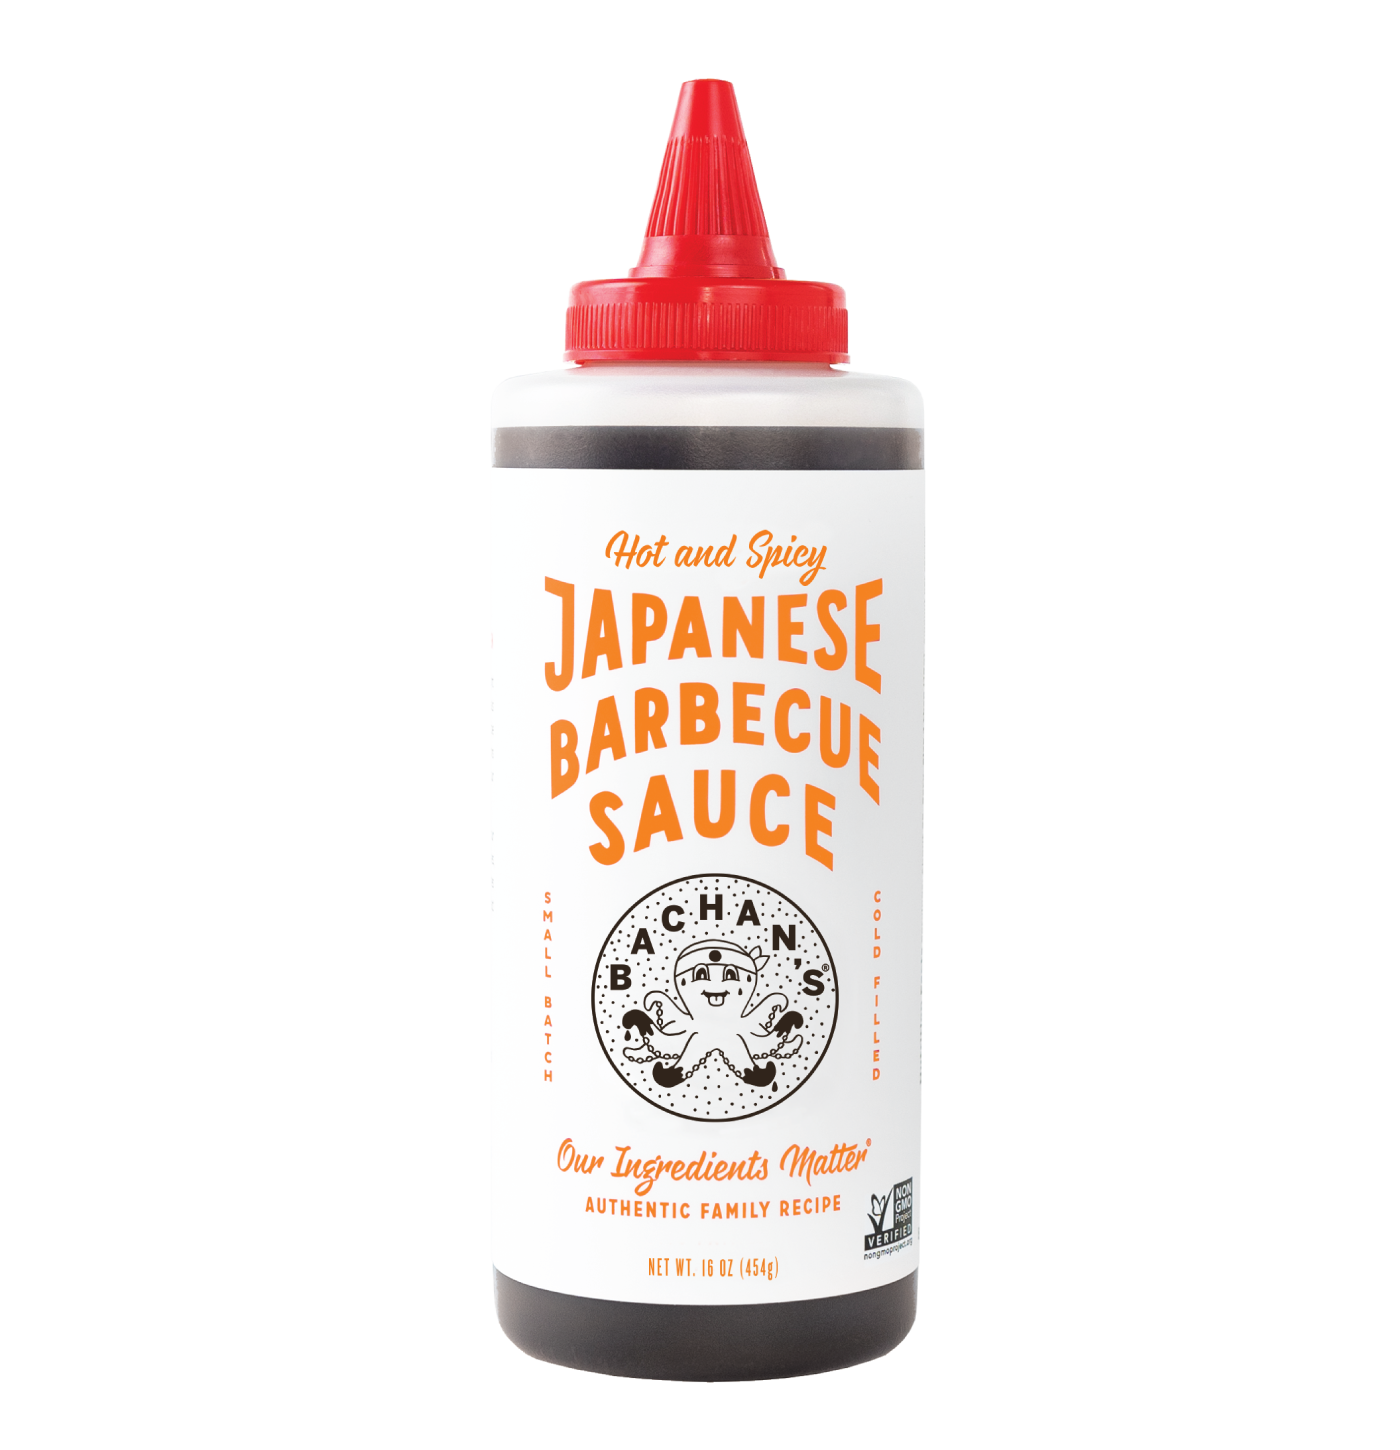 Bachan's Hot and Spicy Japanese Barbecue Sauce